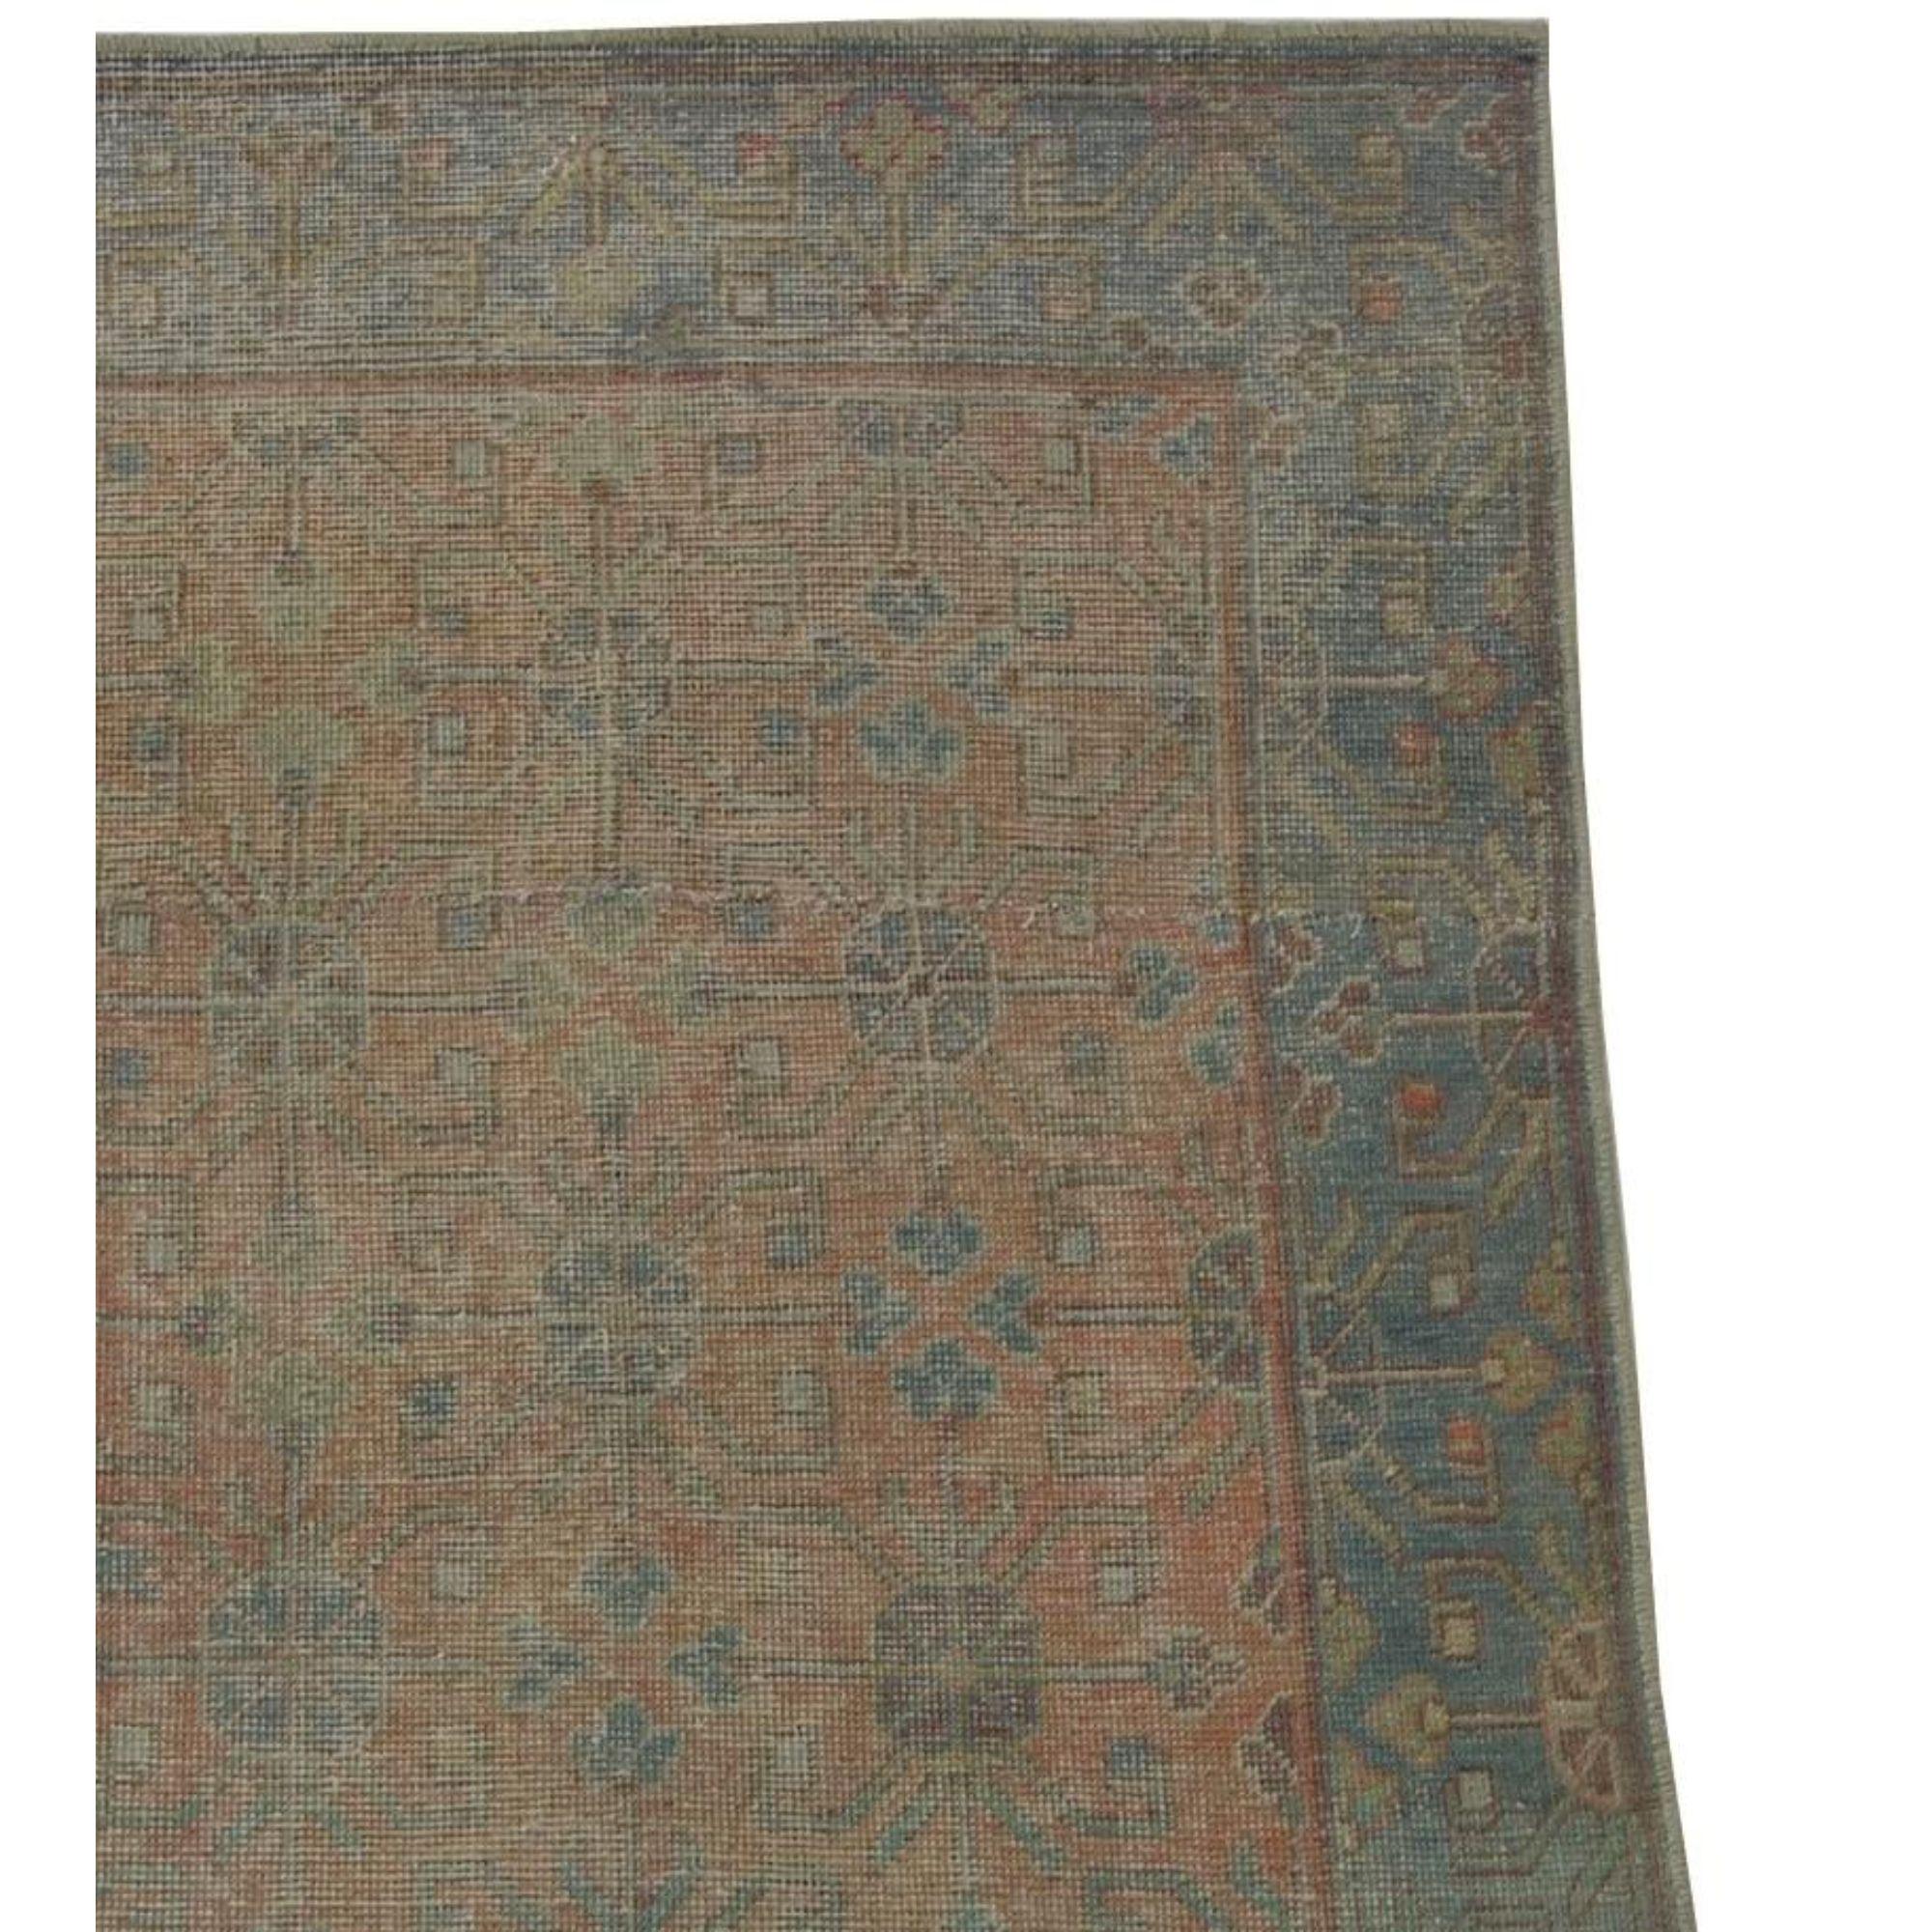 Up for sale is an antique Samakhand rug. This is an Uzbek tribal design rug with a red design throughout the rug.